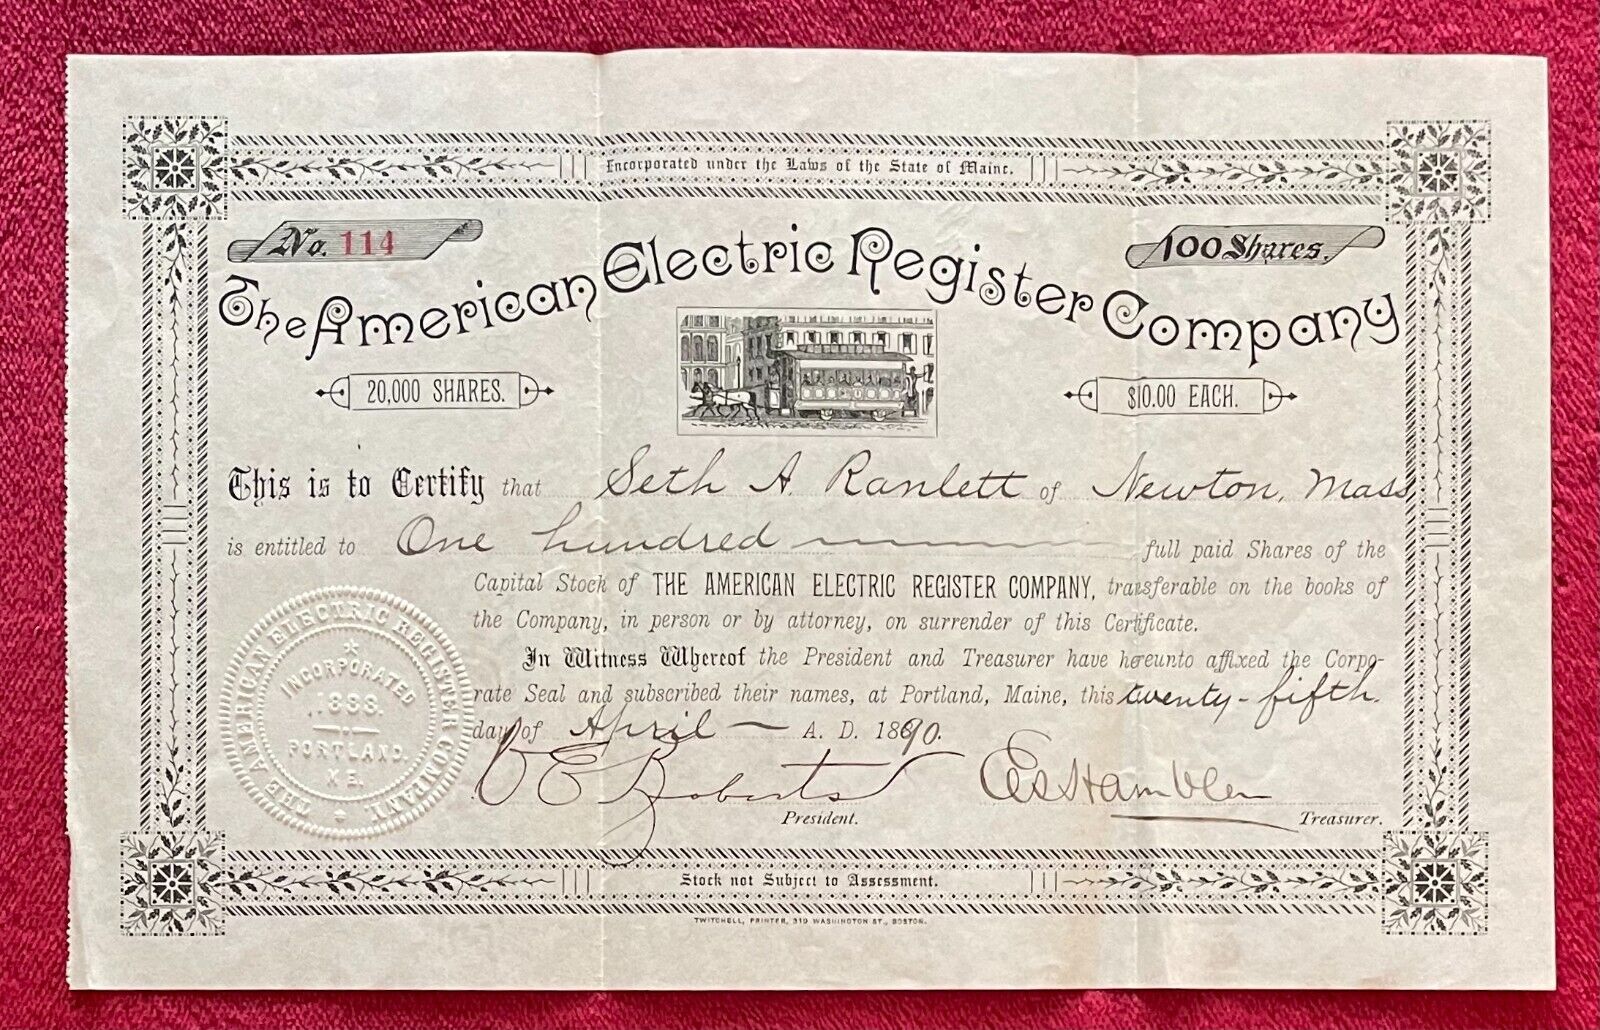 THE AMERICAN ELECTRIC REGISTER COMPANY - PORTLAND MAINE - 1890 STOCK CERTIFICATE